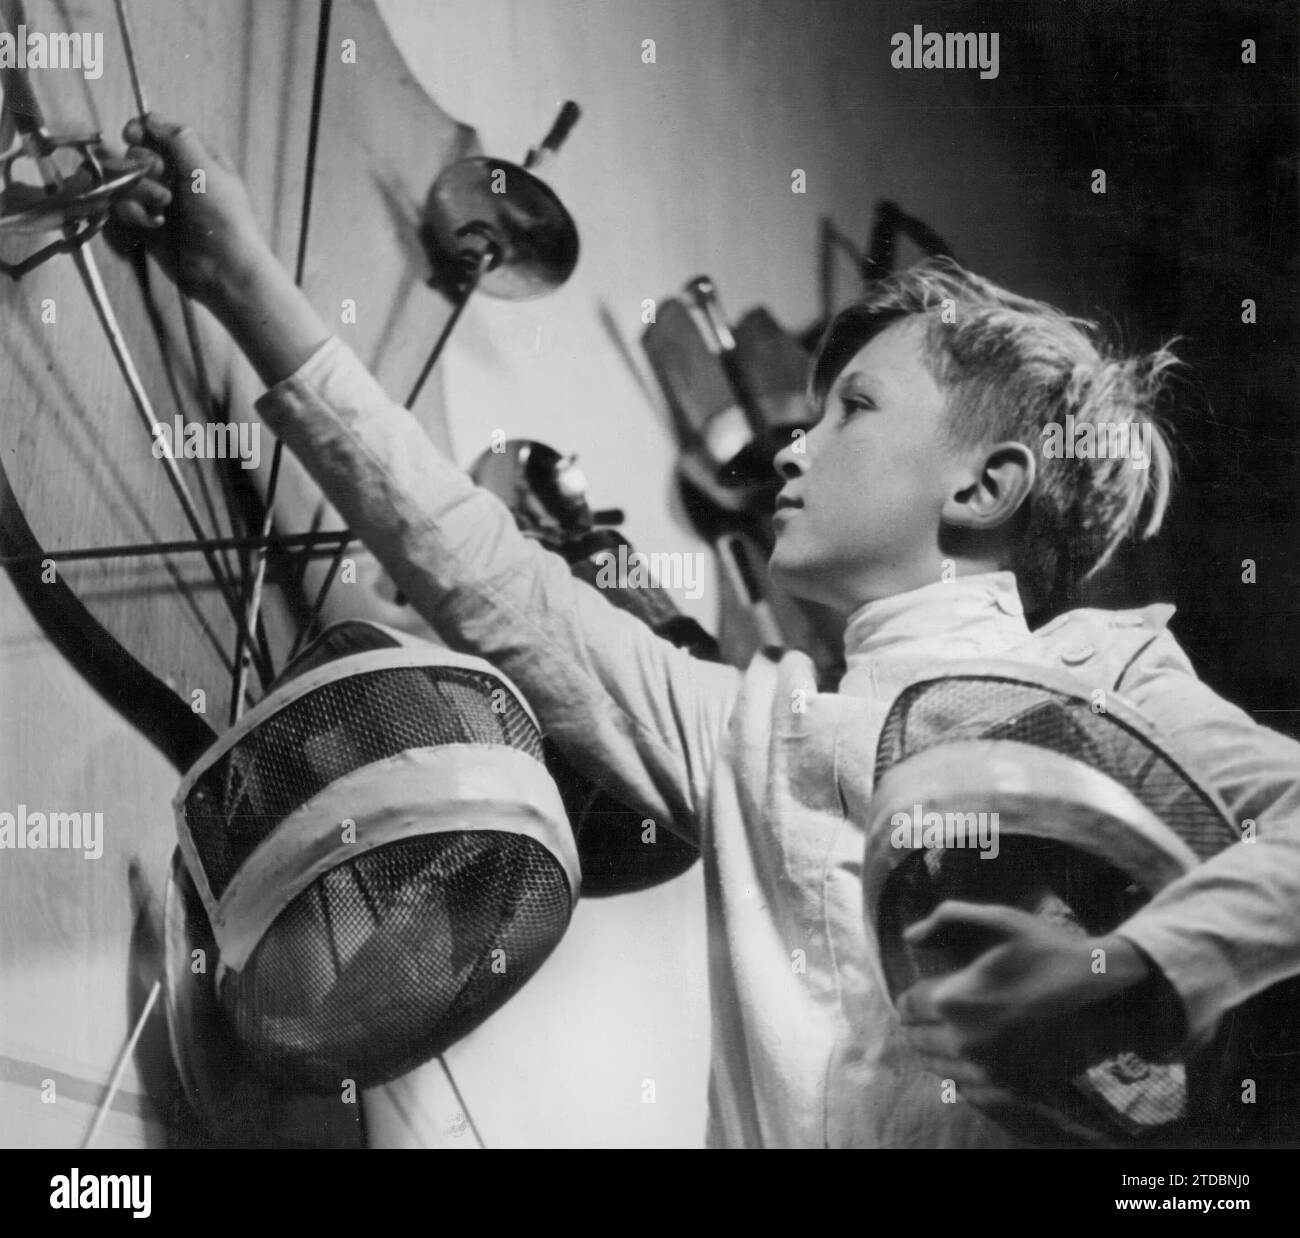 Germany, January 1944. A young boy selecting the foil he will use for fighting, in one of the numerous fencing schools that existed in the country during World War II. Credit: Album / Archivo ABC Stock Photo